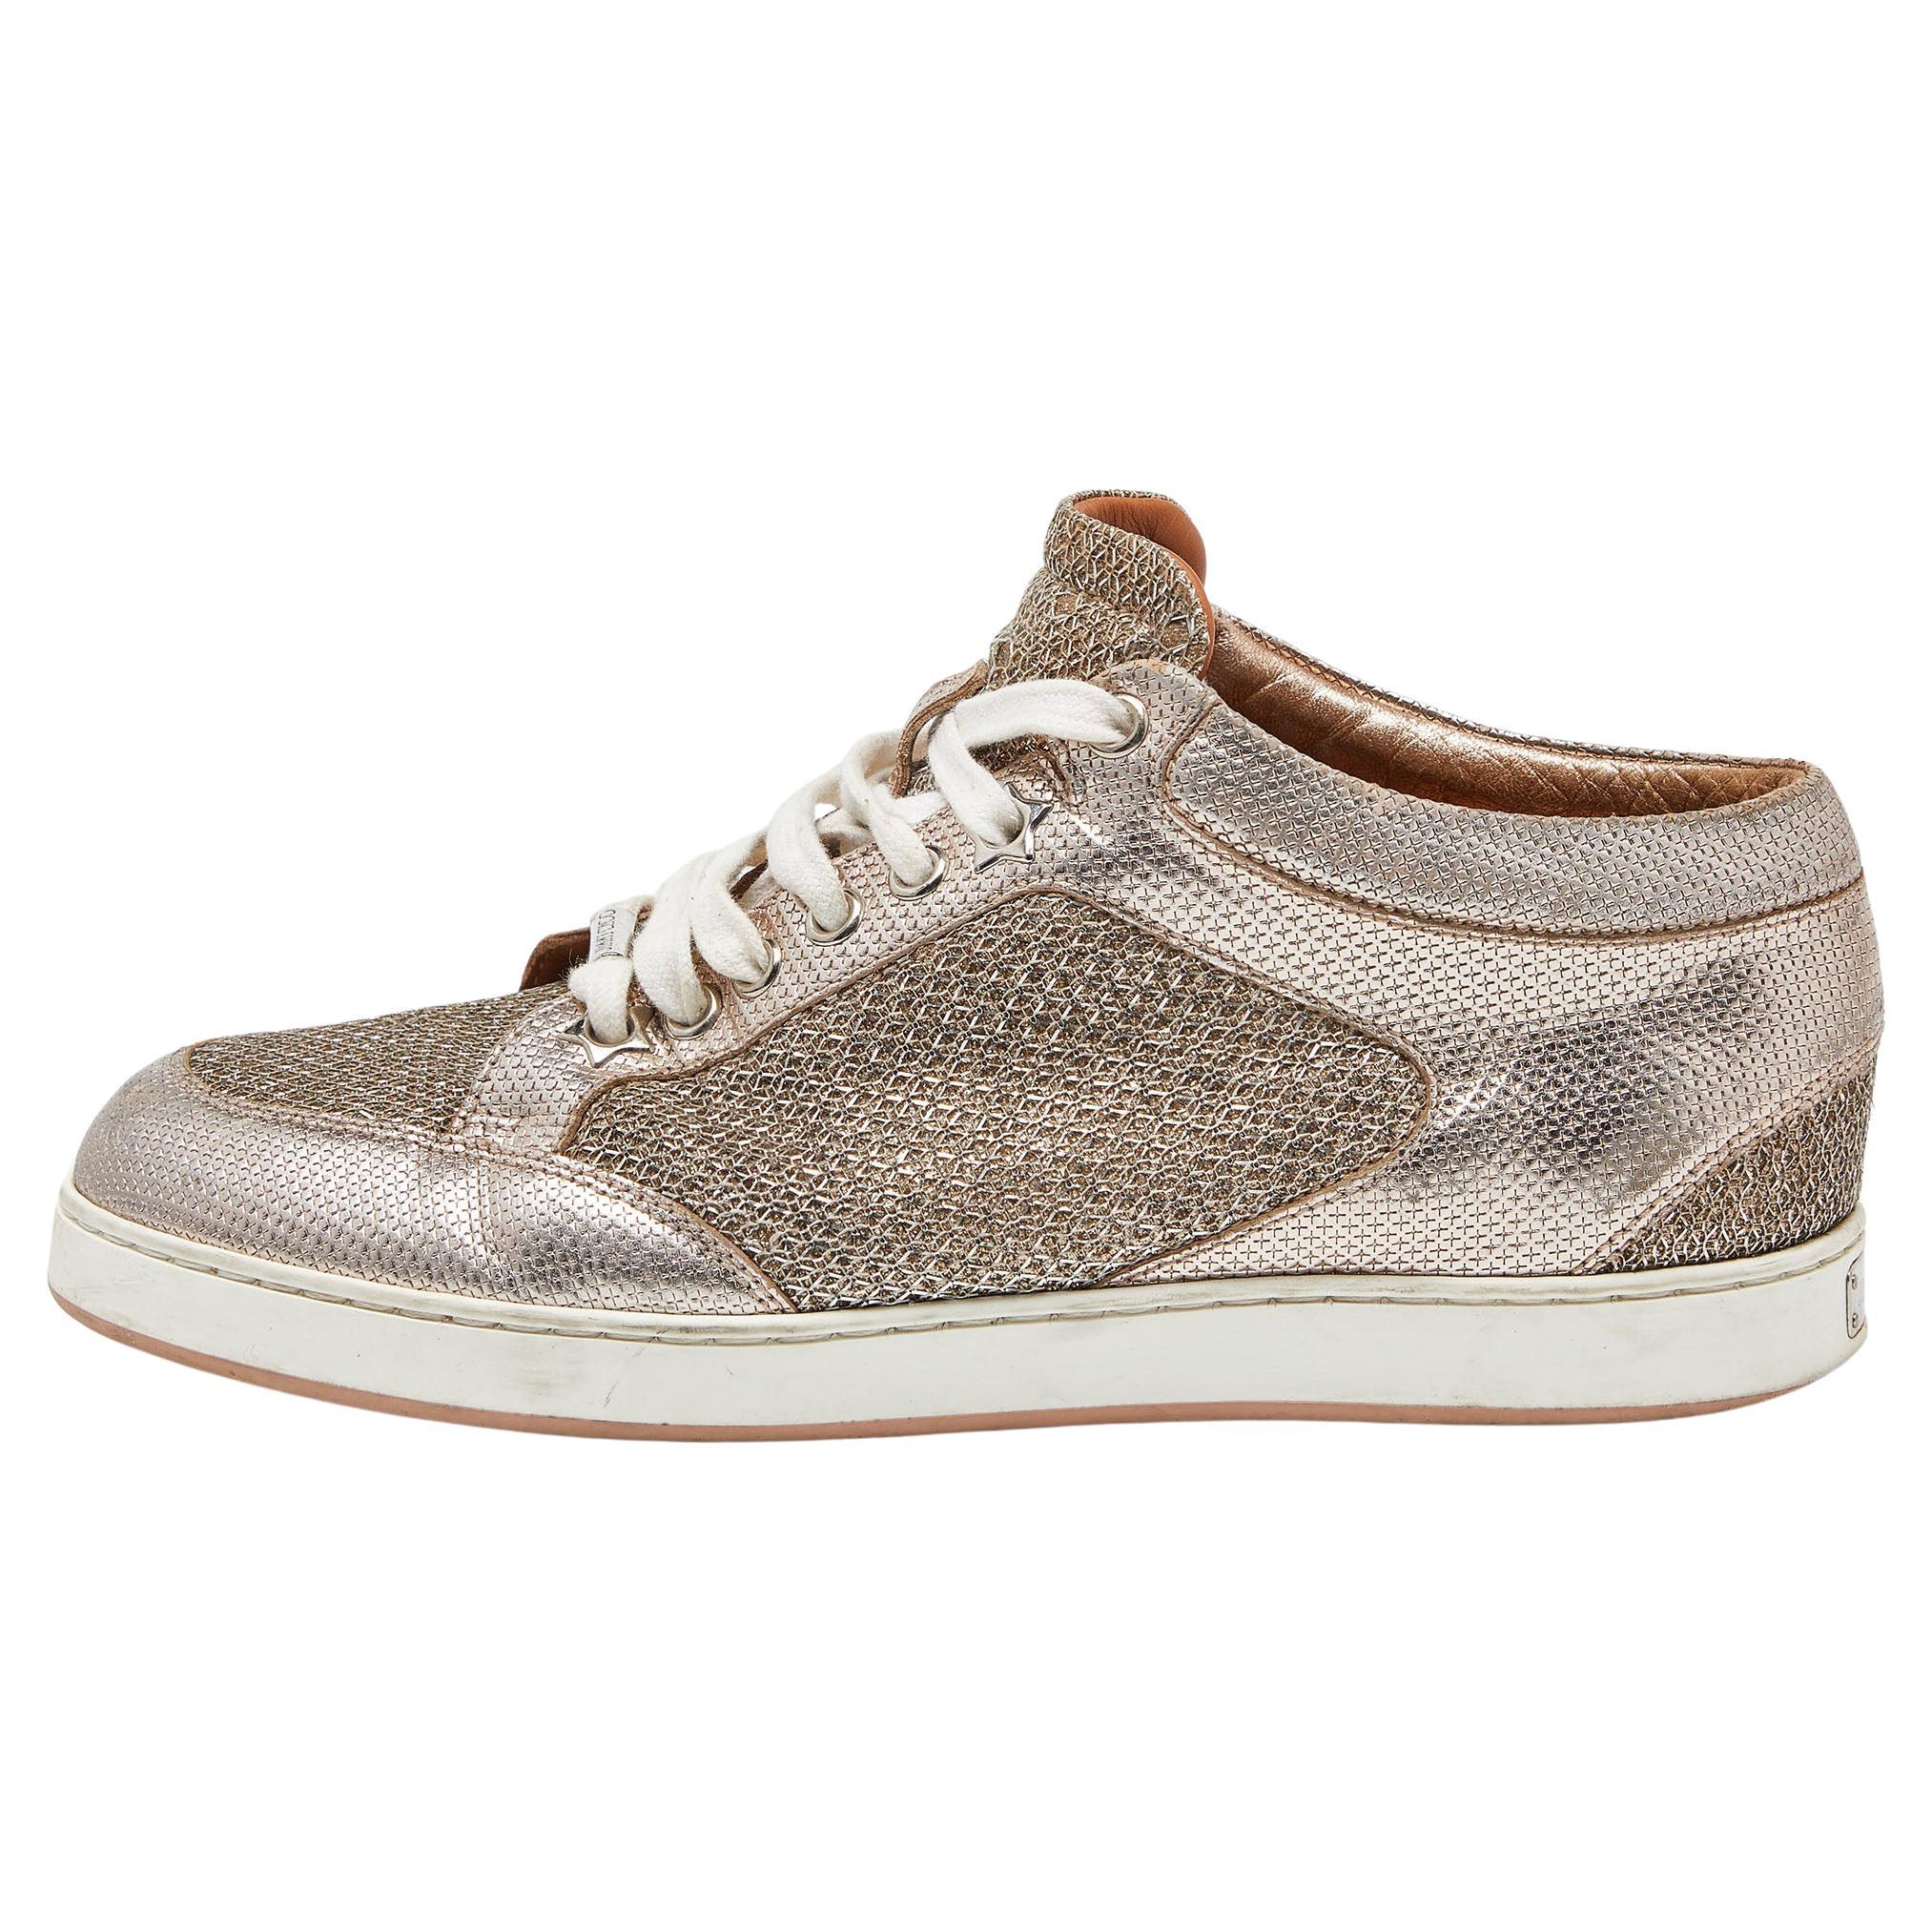 Jimmy Choo Rose Gold Leather and Glitter Miami High Top Sneakers Size 36 For Sale